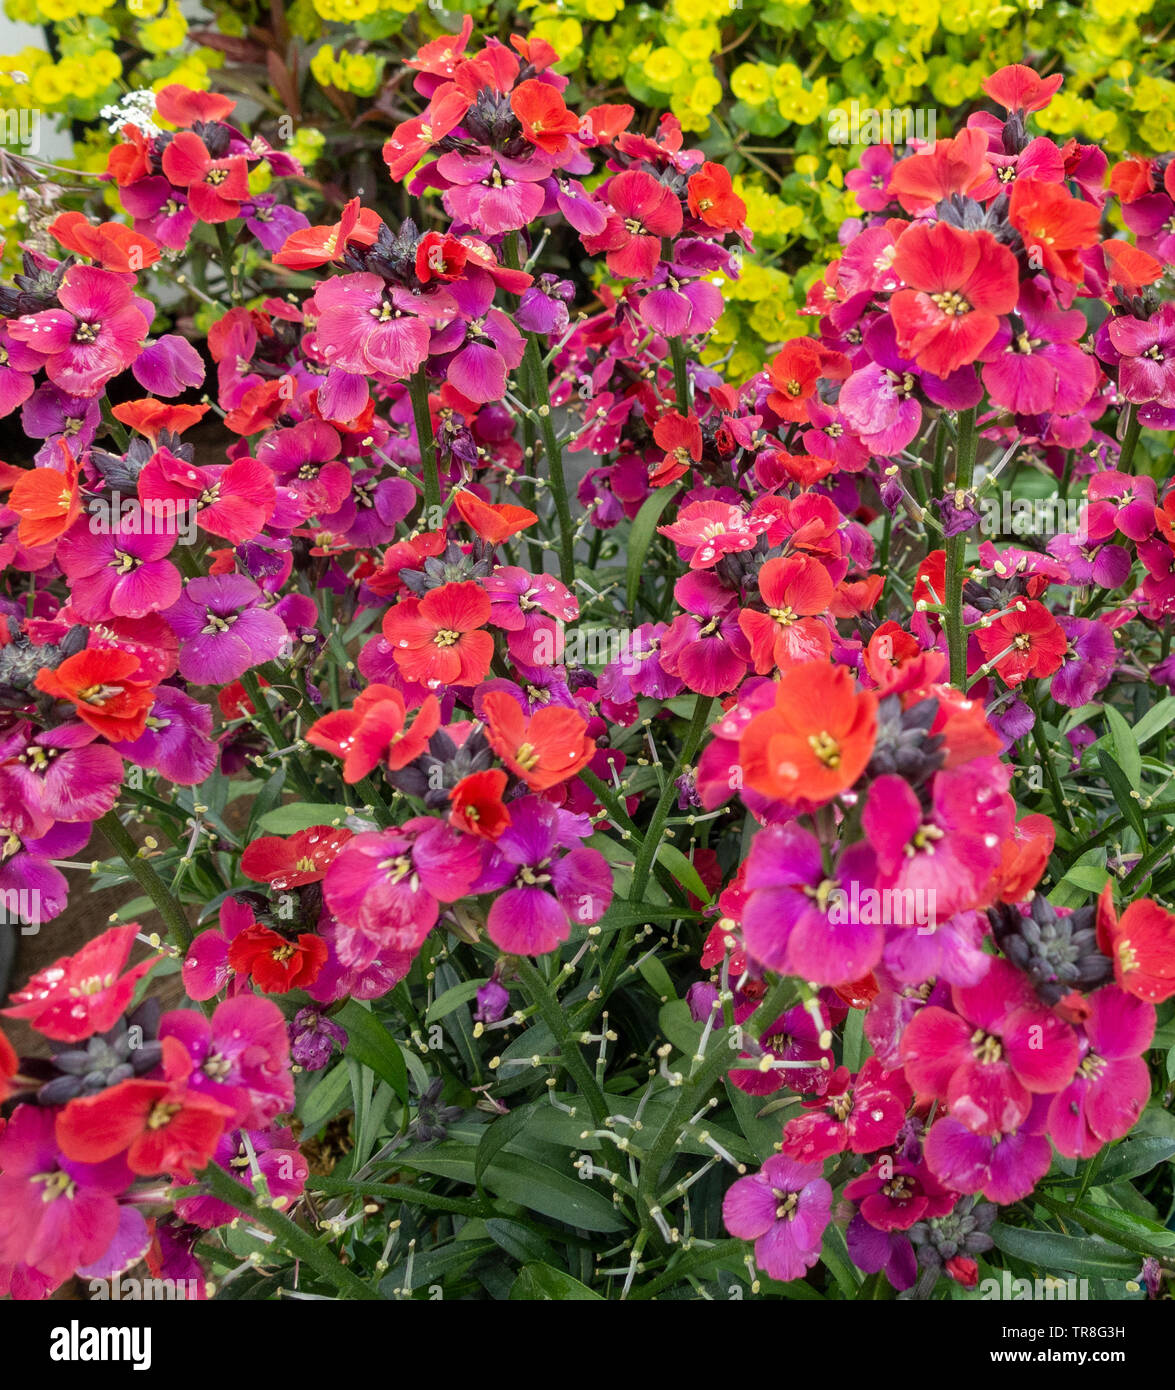 A clump of Erysimum 'Red Jep', a perennial wallflower in shades of red and purple. Stock Photo